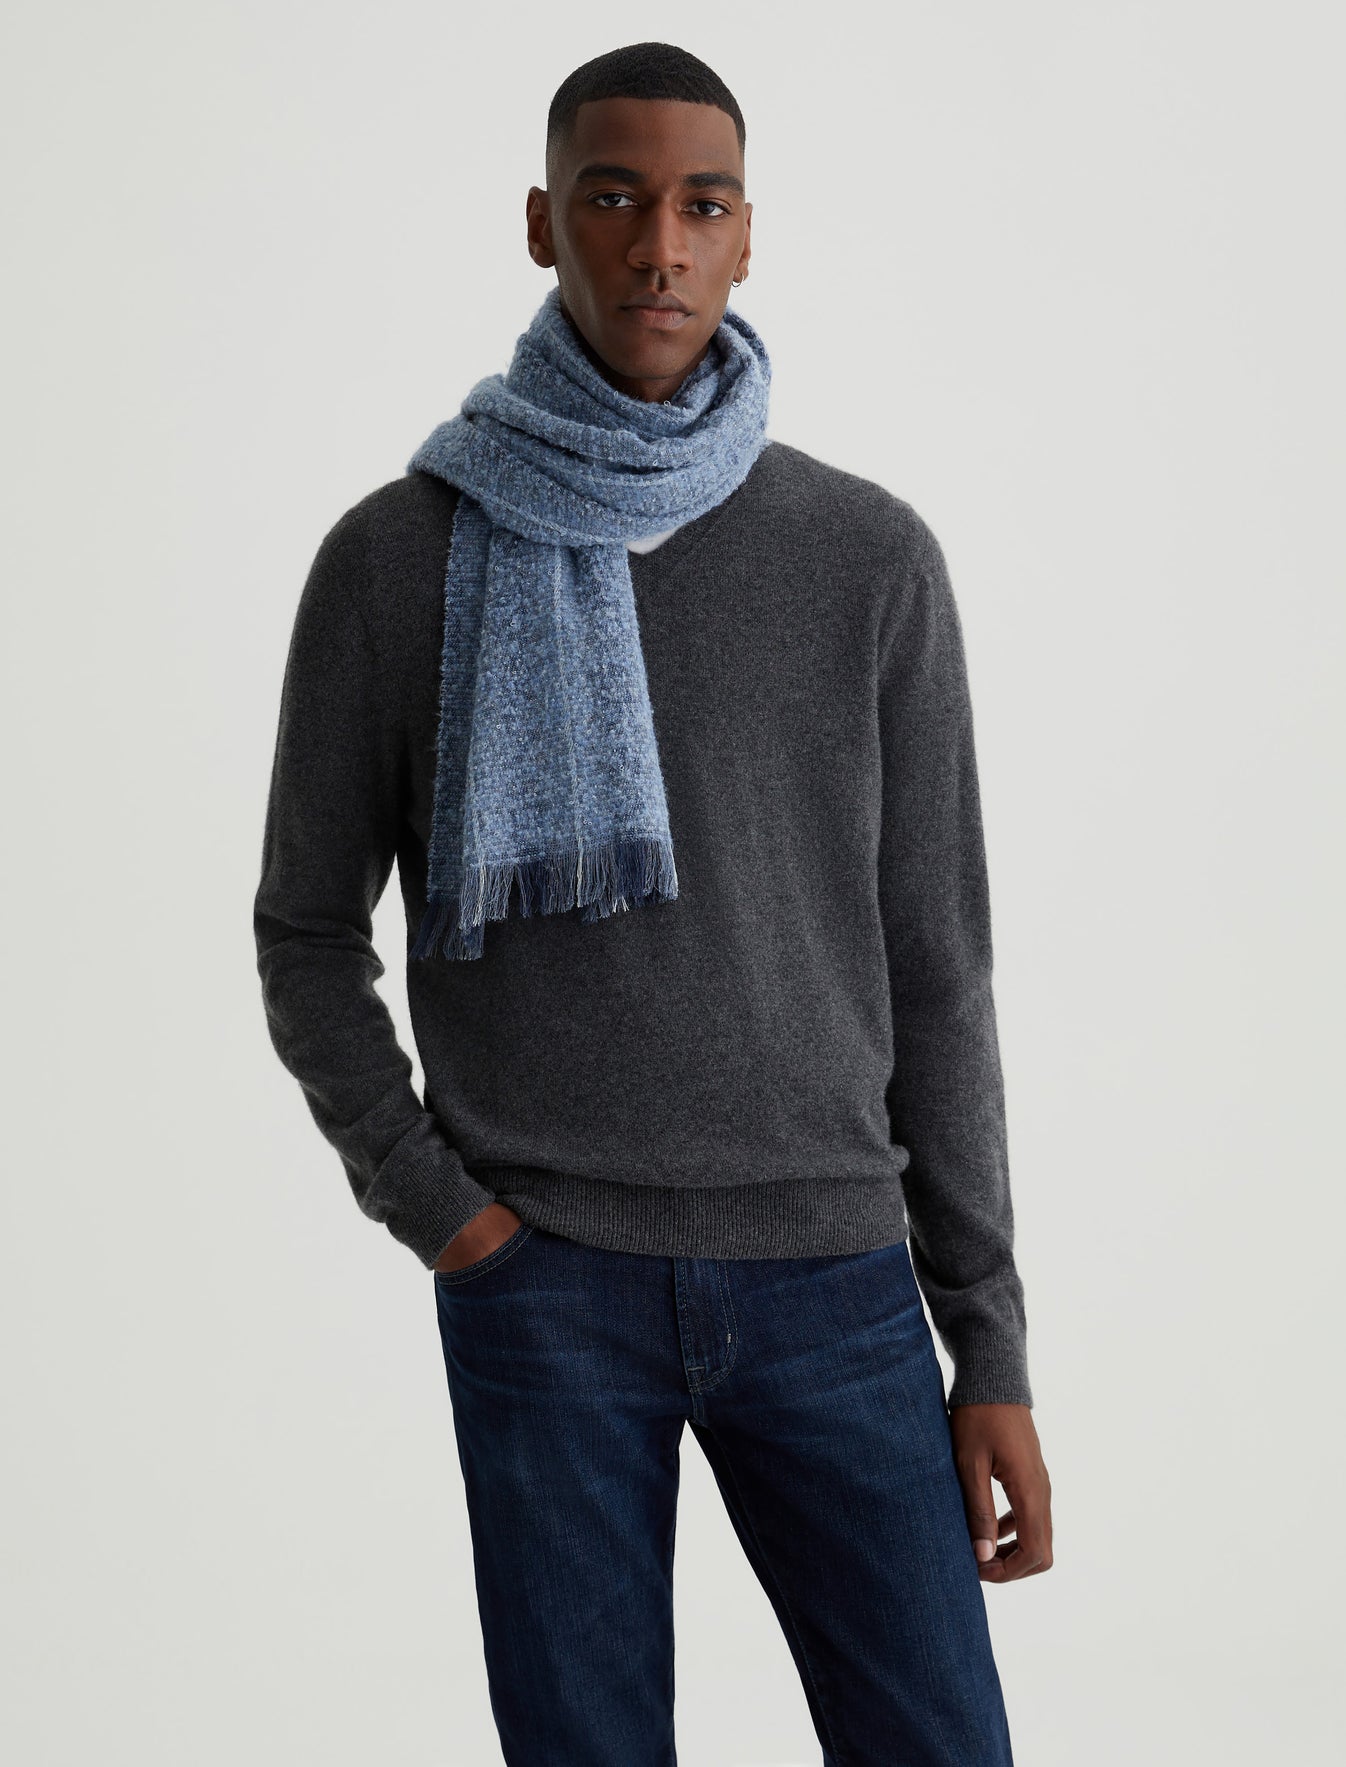 Jeans Stripe Arden AG Accessory Store Scarf Wool Official Indigo at